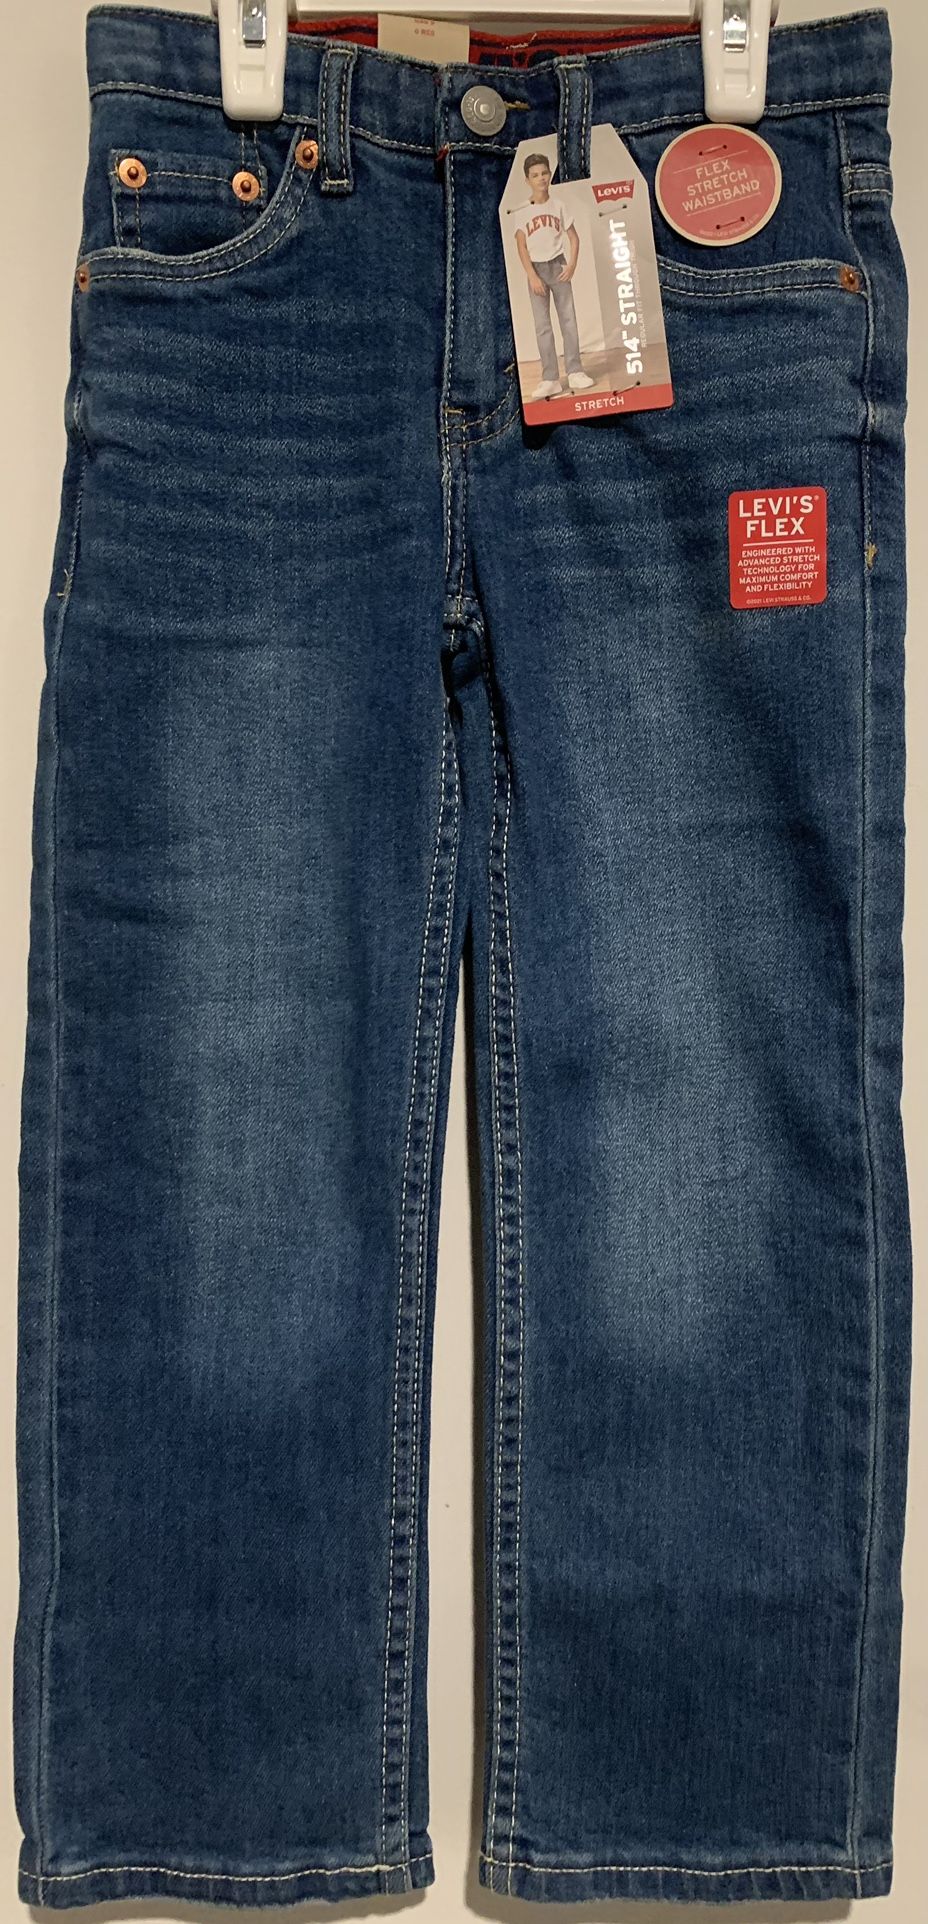 Levis 514 Straight/Stretch Jeans Size 6 (Blue)